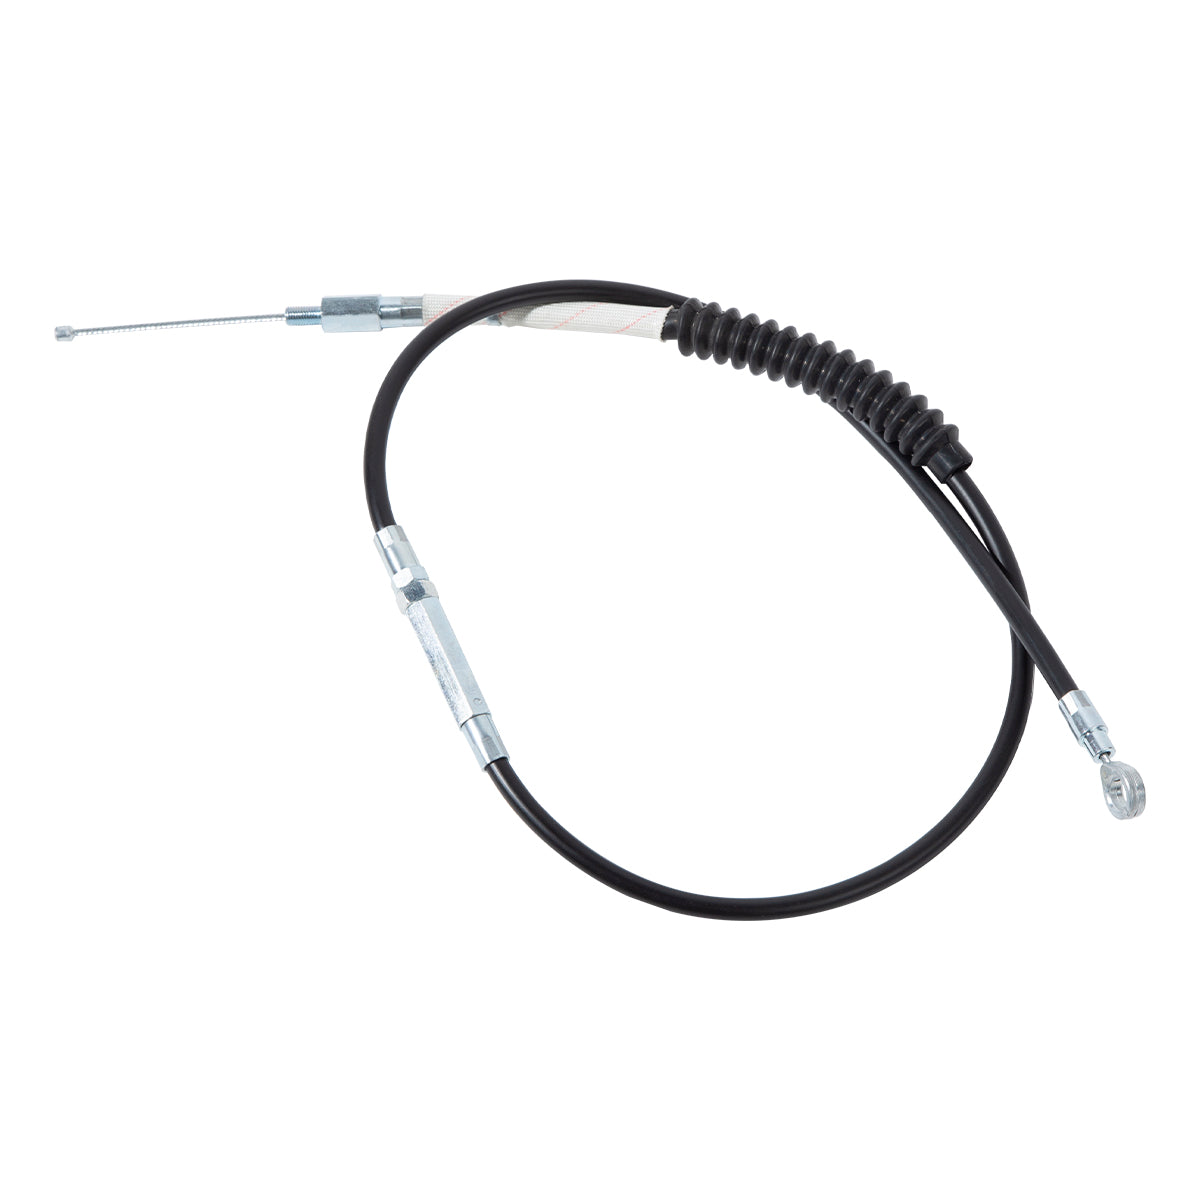 Custome Chrome 120CM Black Vinyl 47.2" Clutch Cable Fit For Harley Sportster XL883 XL1200 02-14